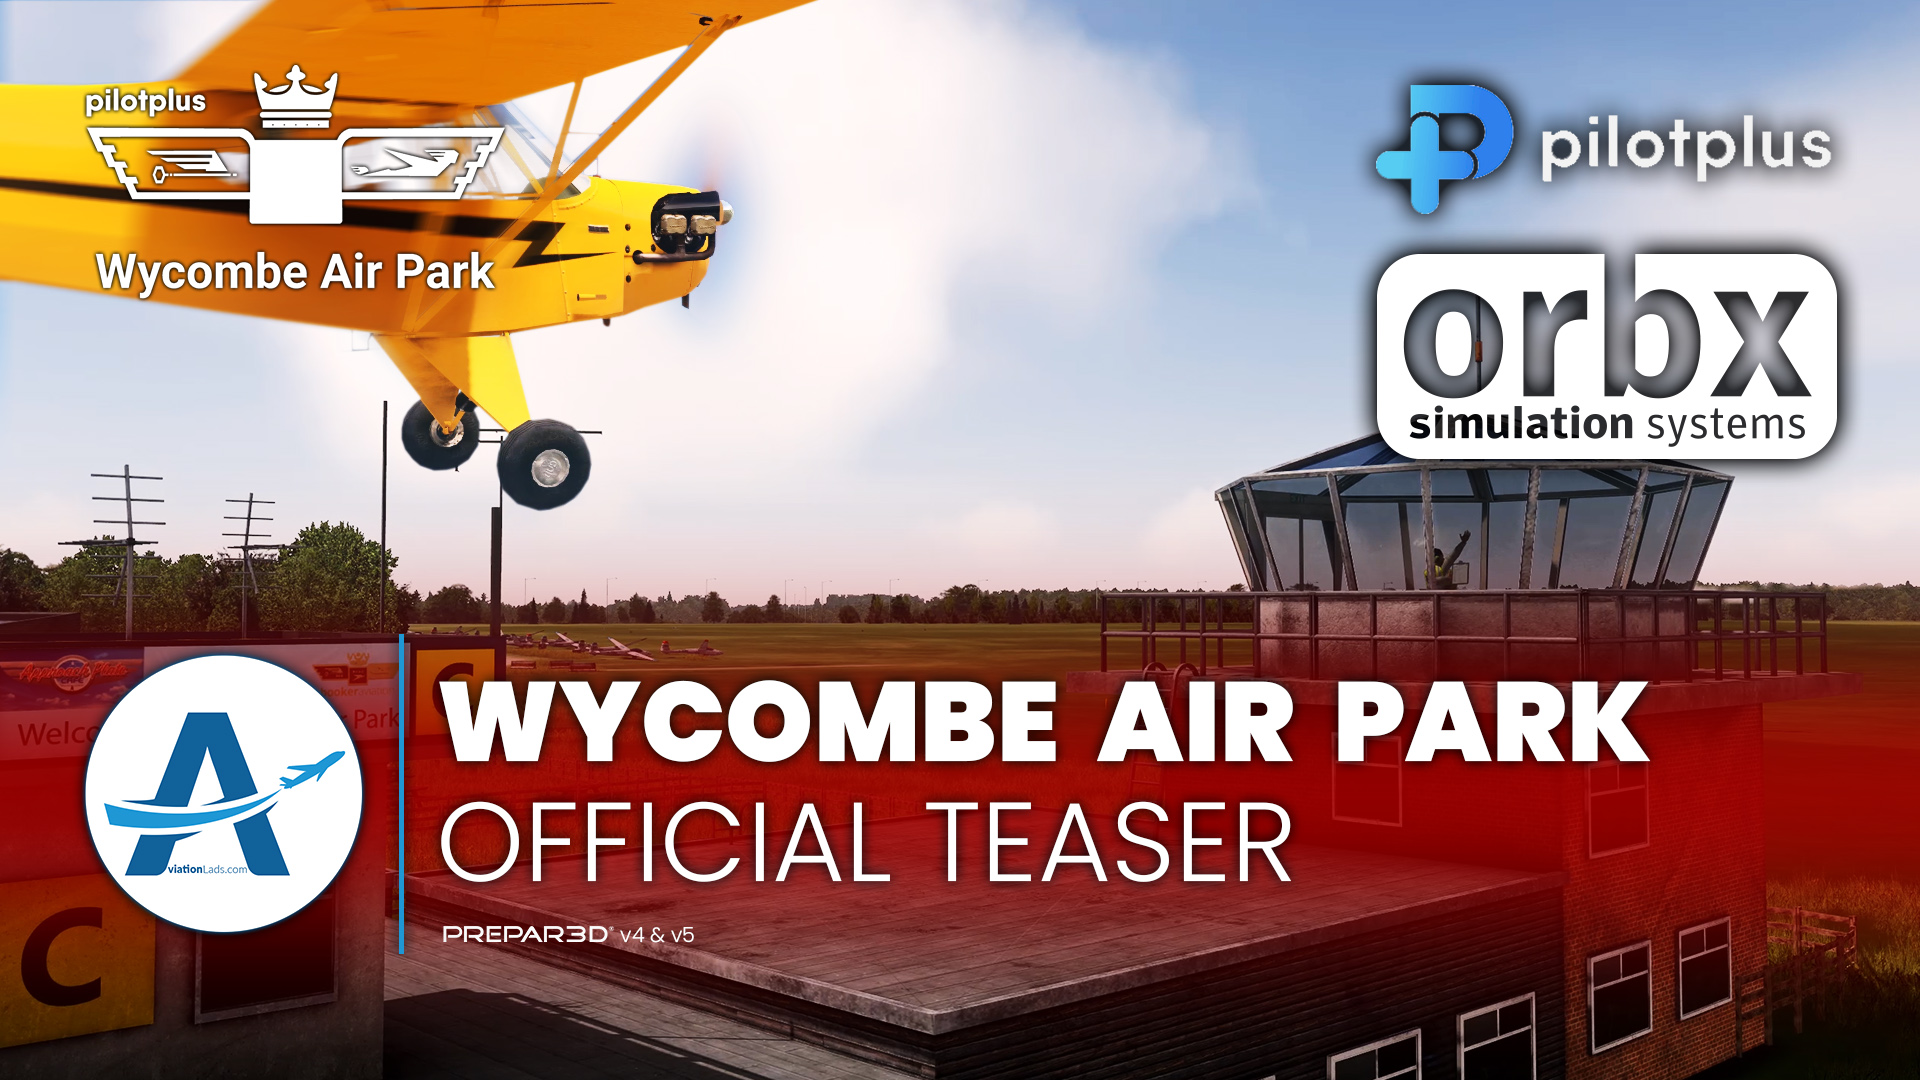 [TEASER] Pilot Plus – Wycombe AirPark